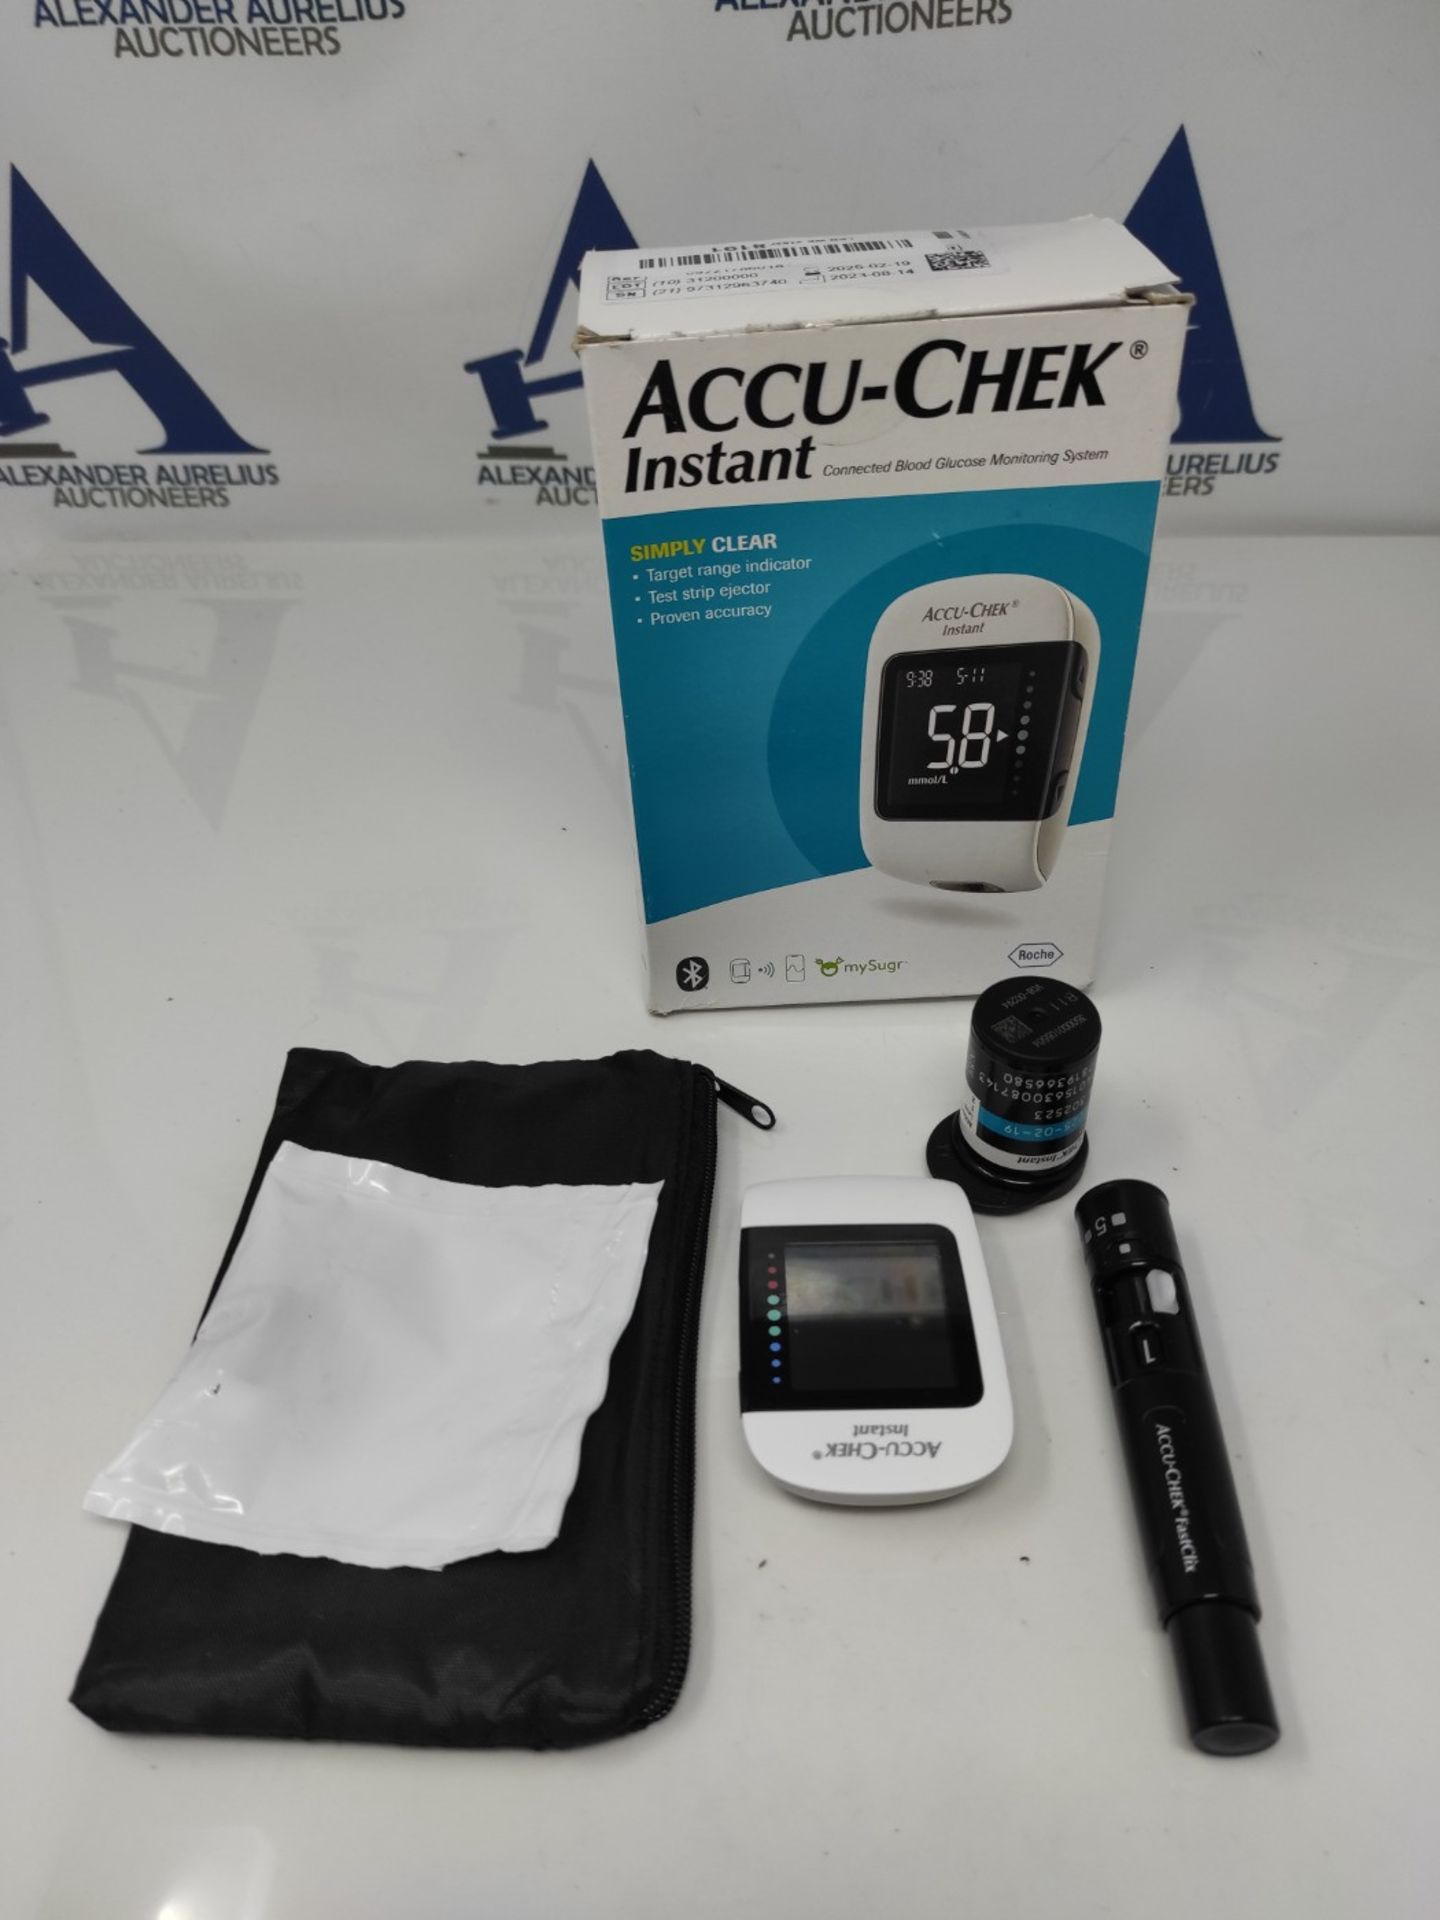 Accu Chek Instant Blood Glucose Monitoring System, white